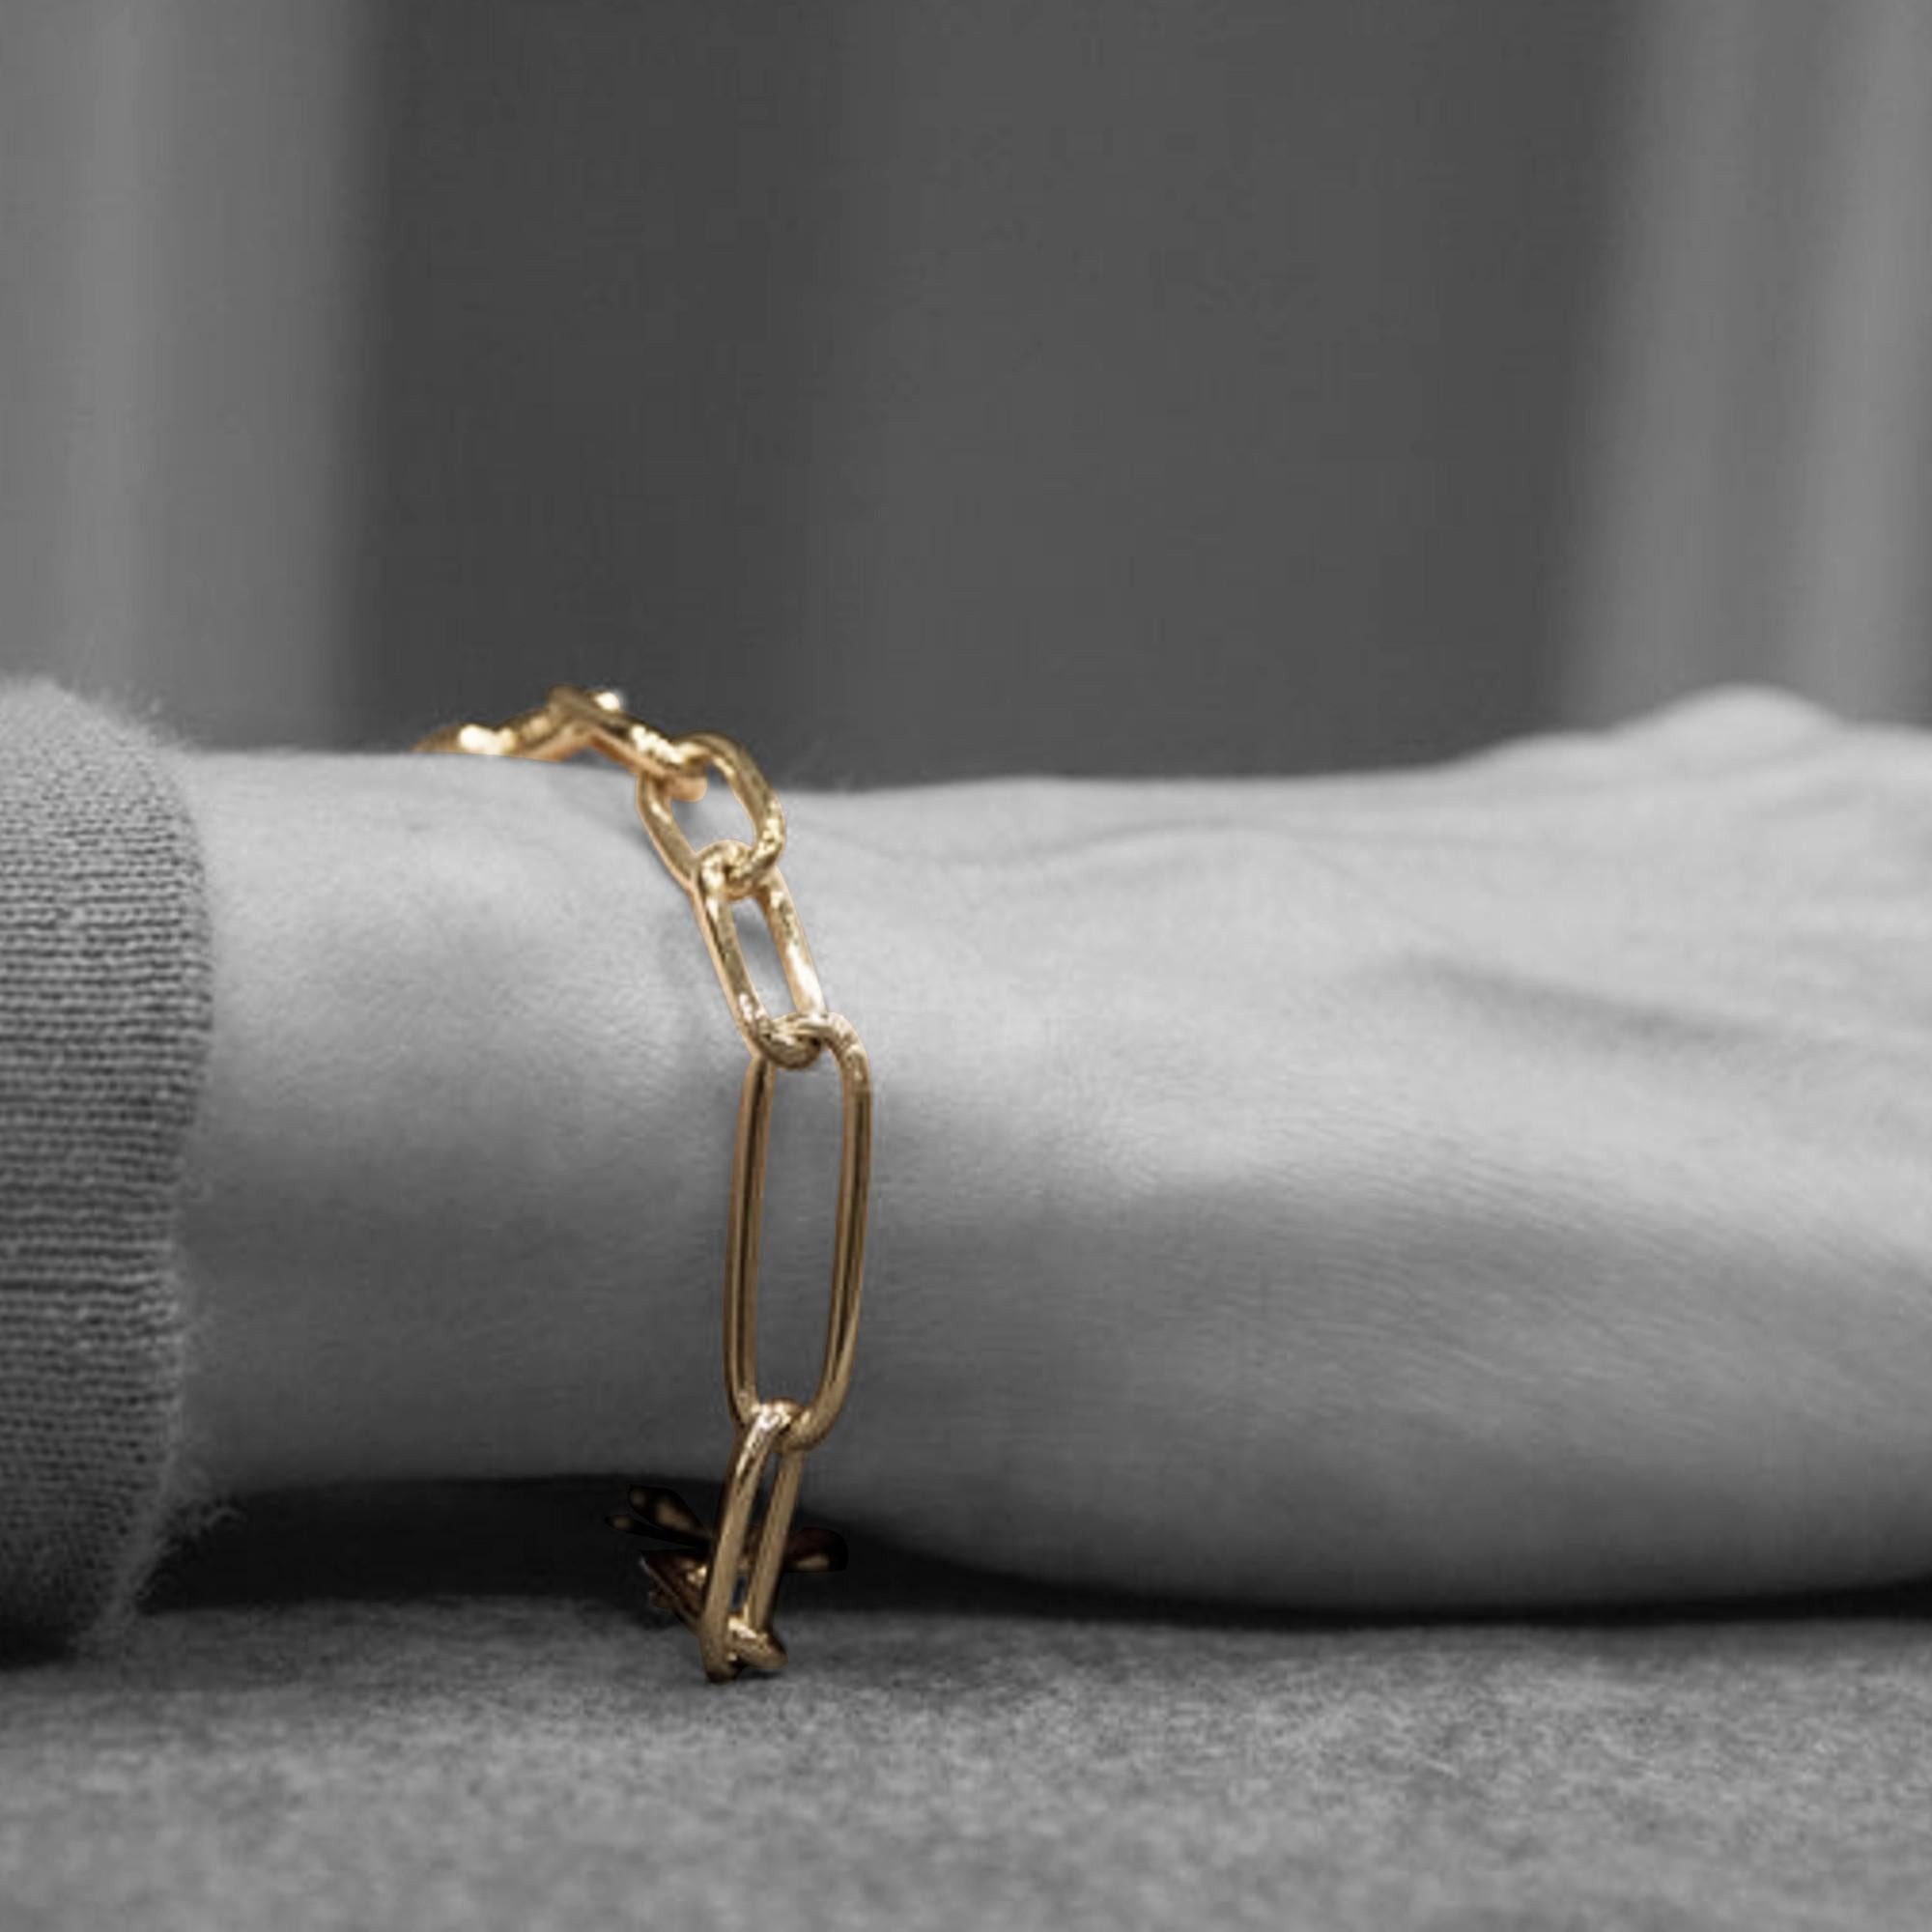 Alex Jona design collection, hand crafted in Italy, 18 karat yellow gold chain bracelet.
Dimension : L 7.87 in X W 0.27 in. -  L 20 cm X W 7 mm

Alex Jona jewels stand out, not only for their special design and for the excellent quality of the